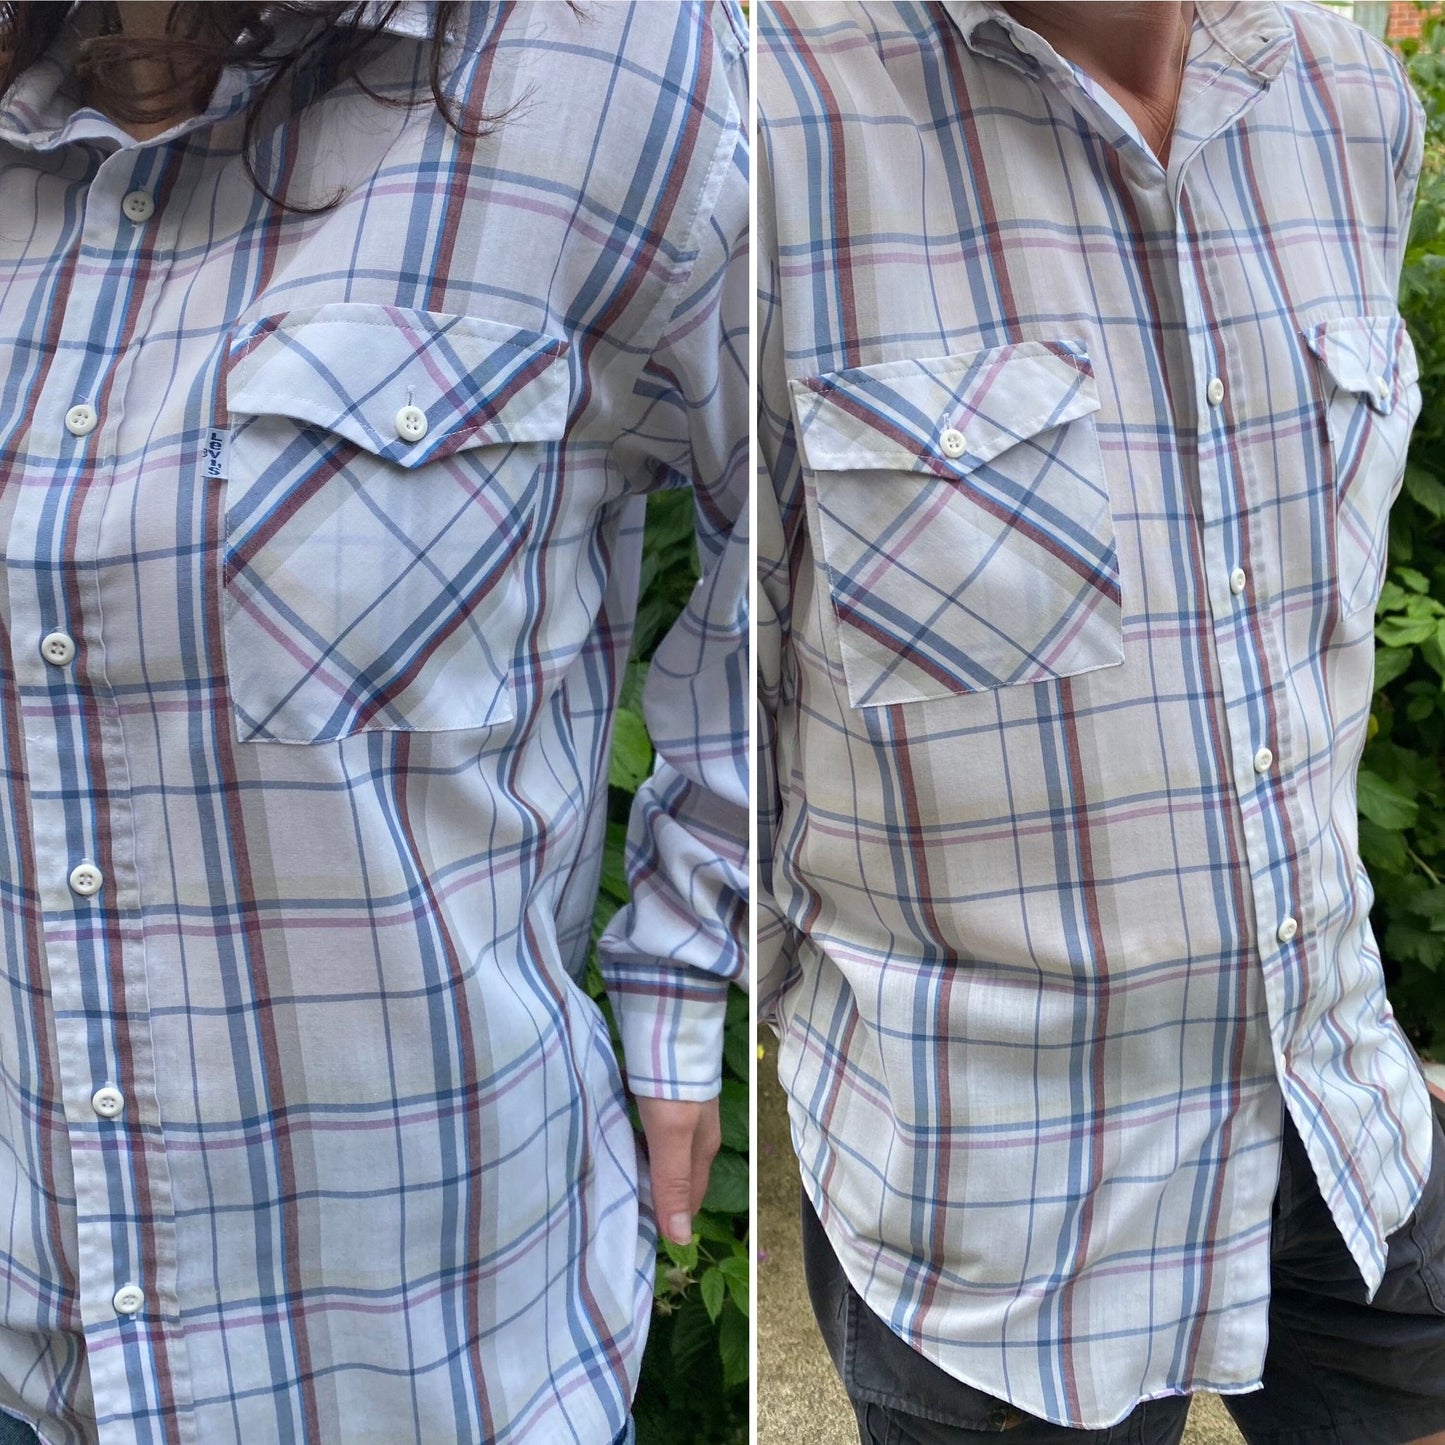 Vintage Levi's White Striped Cotton Shirt with Chest Pockets - Classic Style and Timeless Appeal . Approx UK size large (mens) 14-18  (women’s)